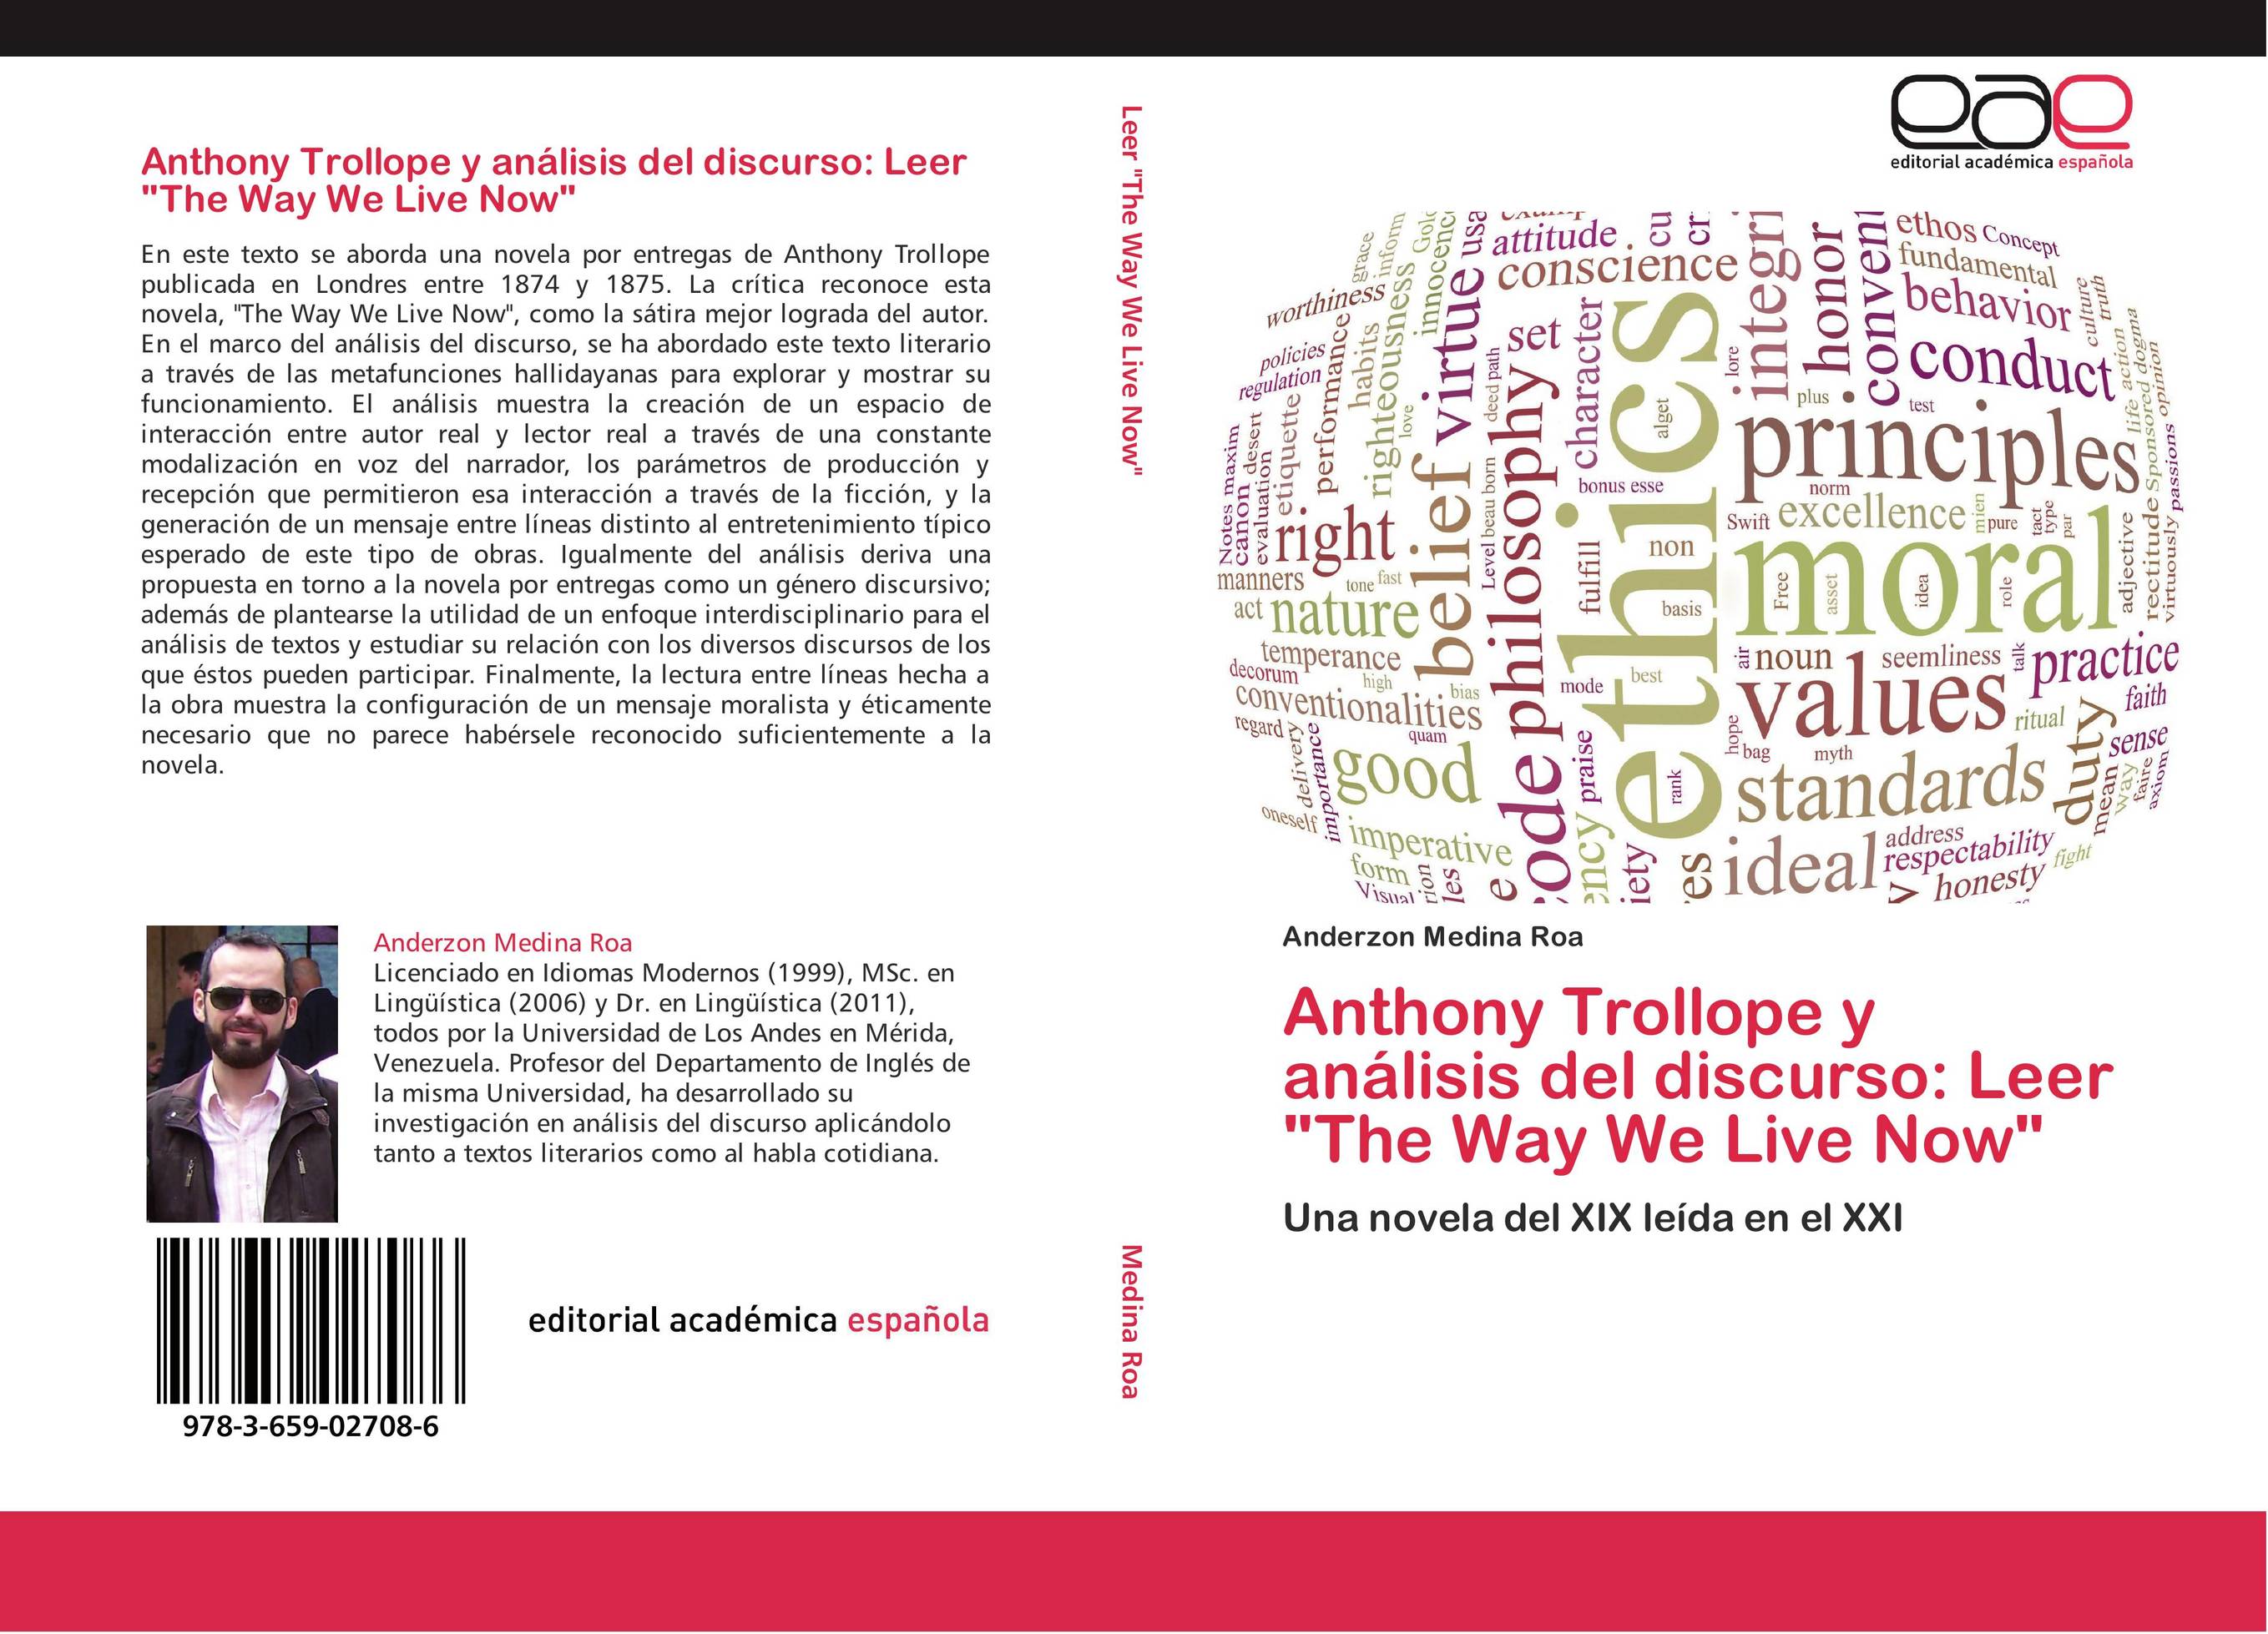 Anthony Trollope y análisis del discurso: Leer "The Way We Live Now"